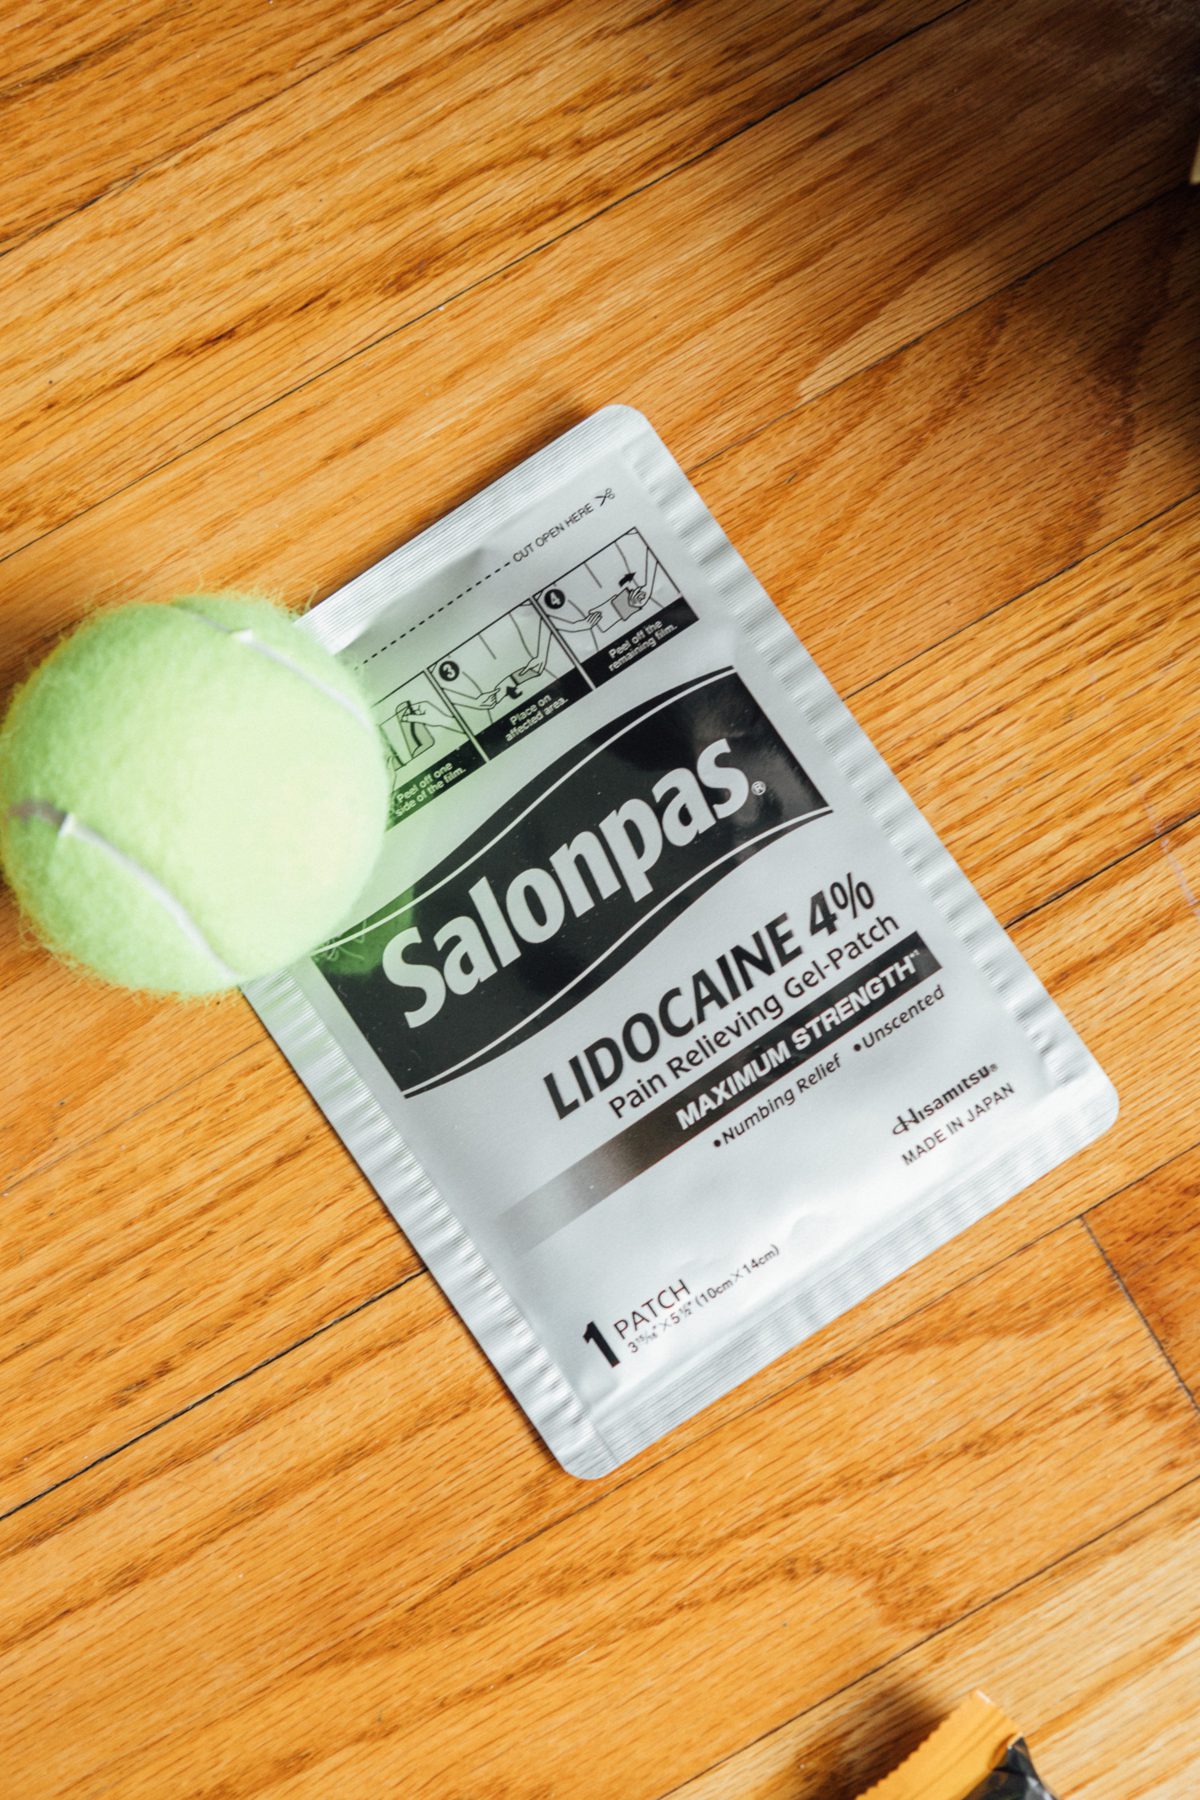 Tennis ball and lidocaine patches